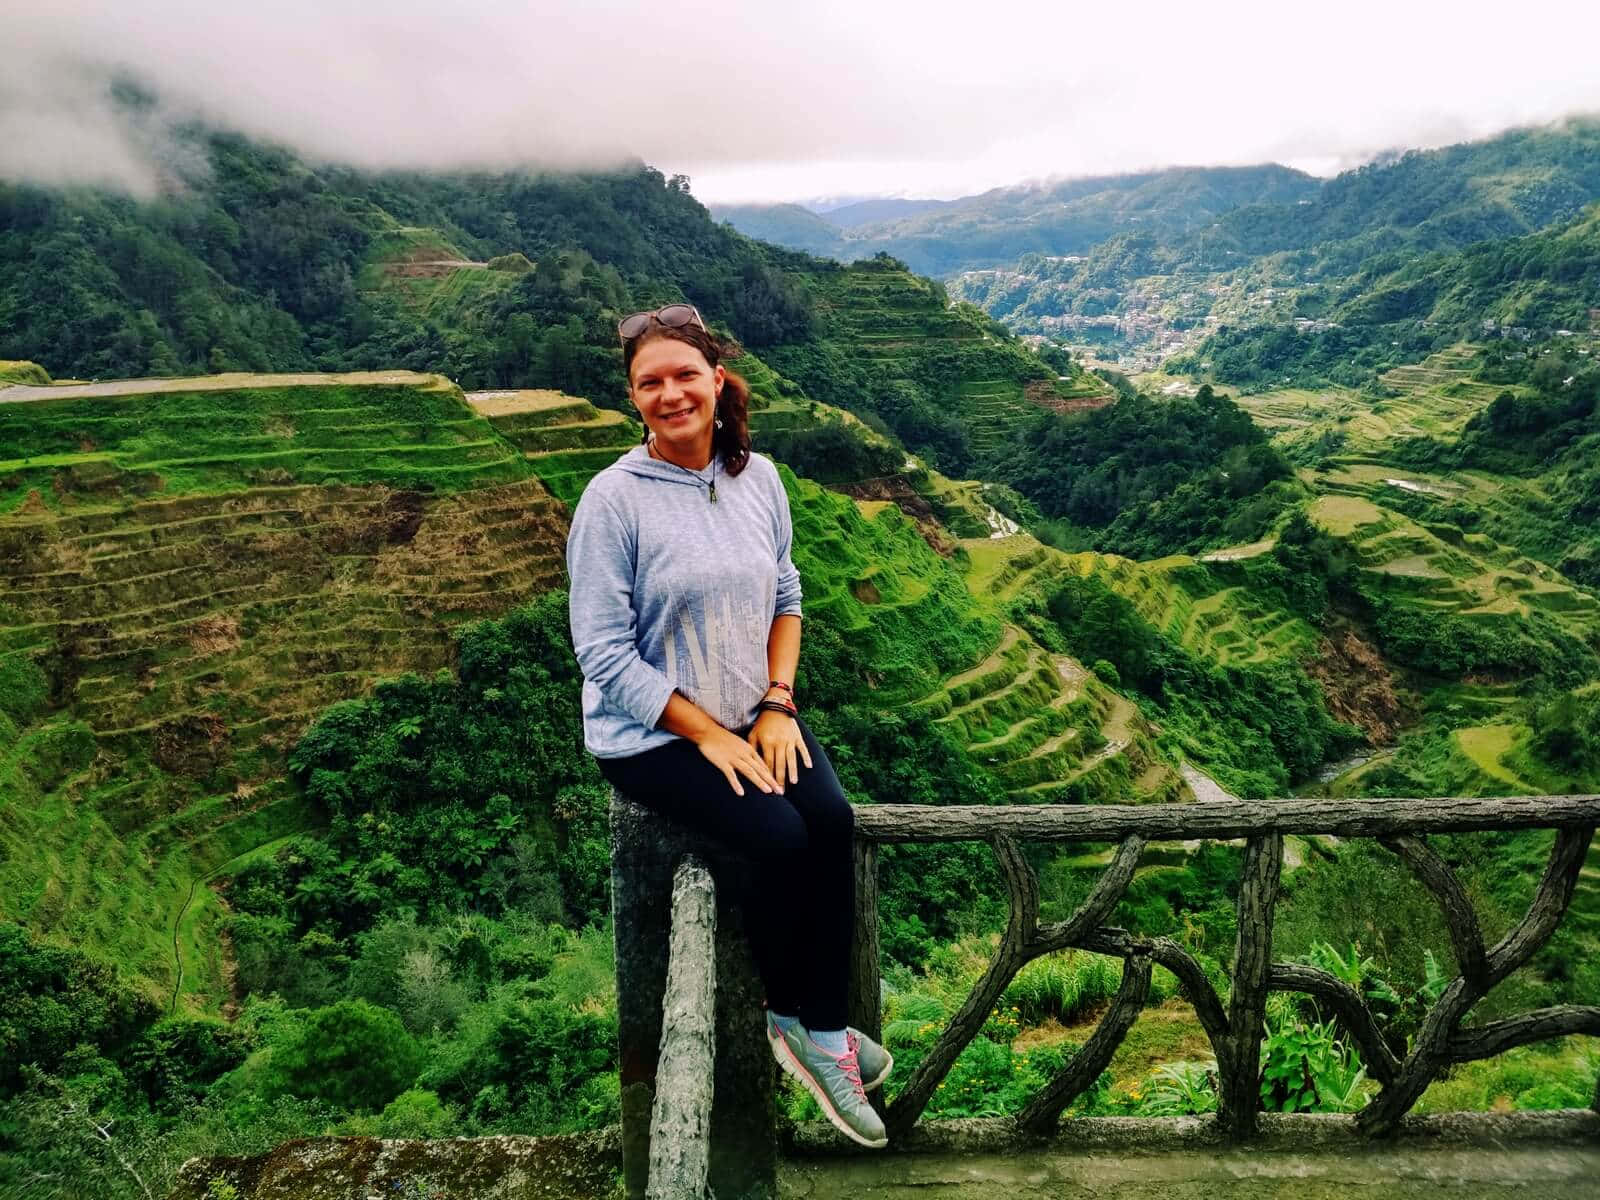 Enthralled tourist exploring Banaue Rice Terraces in the Phillippines. Wallpaper